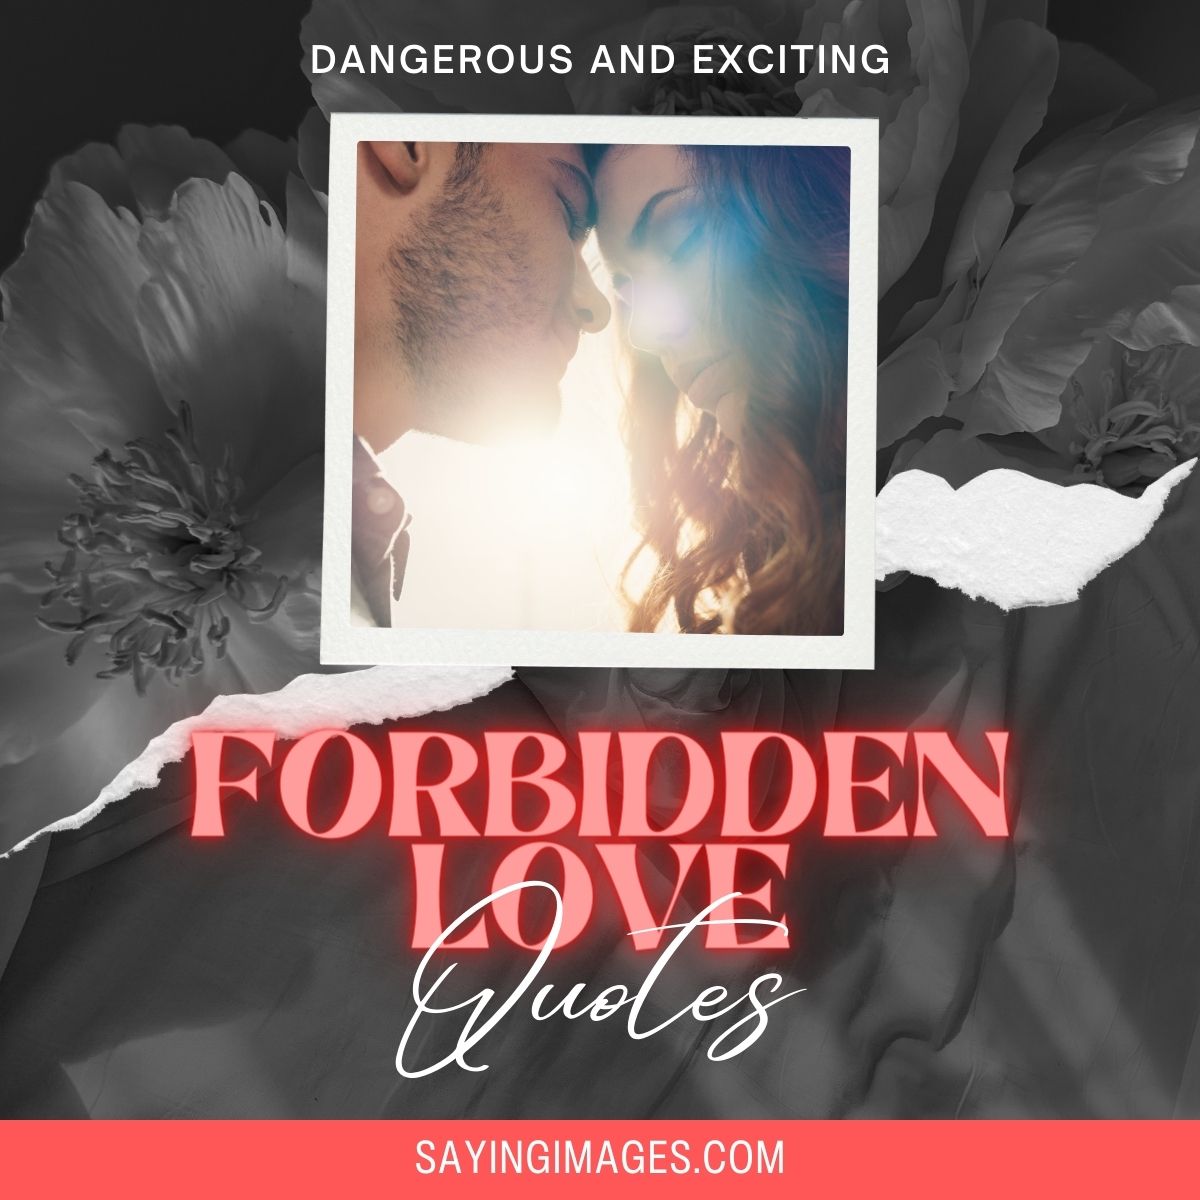 Quotes About The Dangers And Excitement Of Forbidden Love